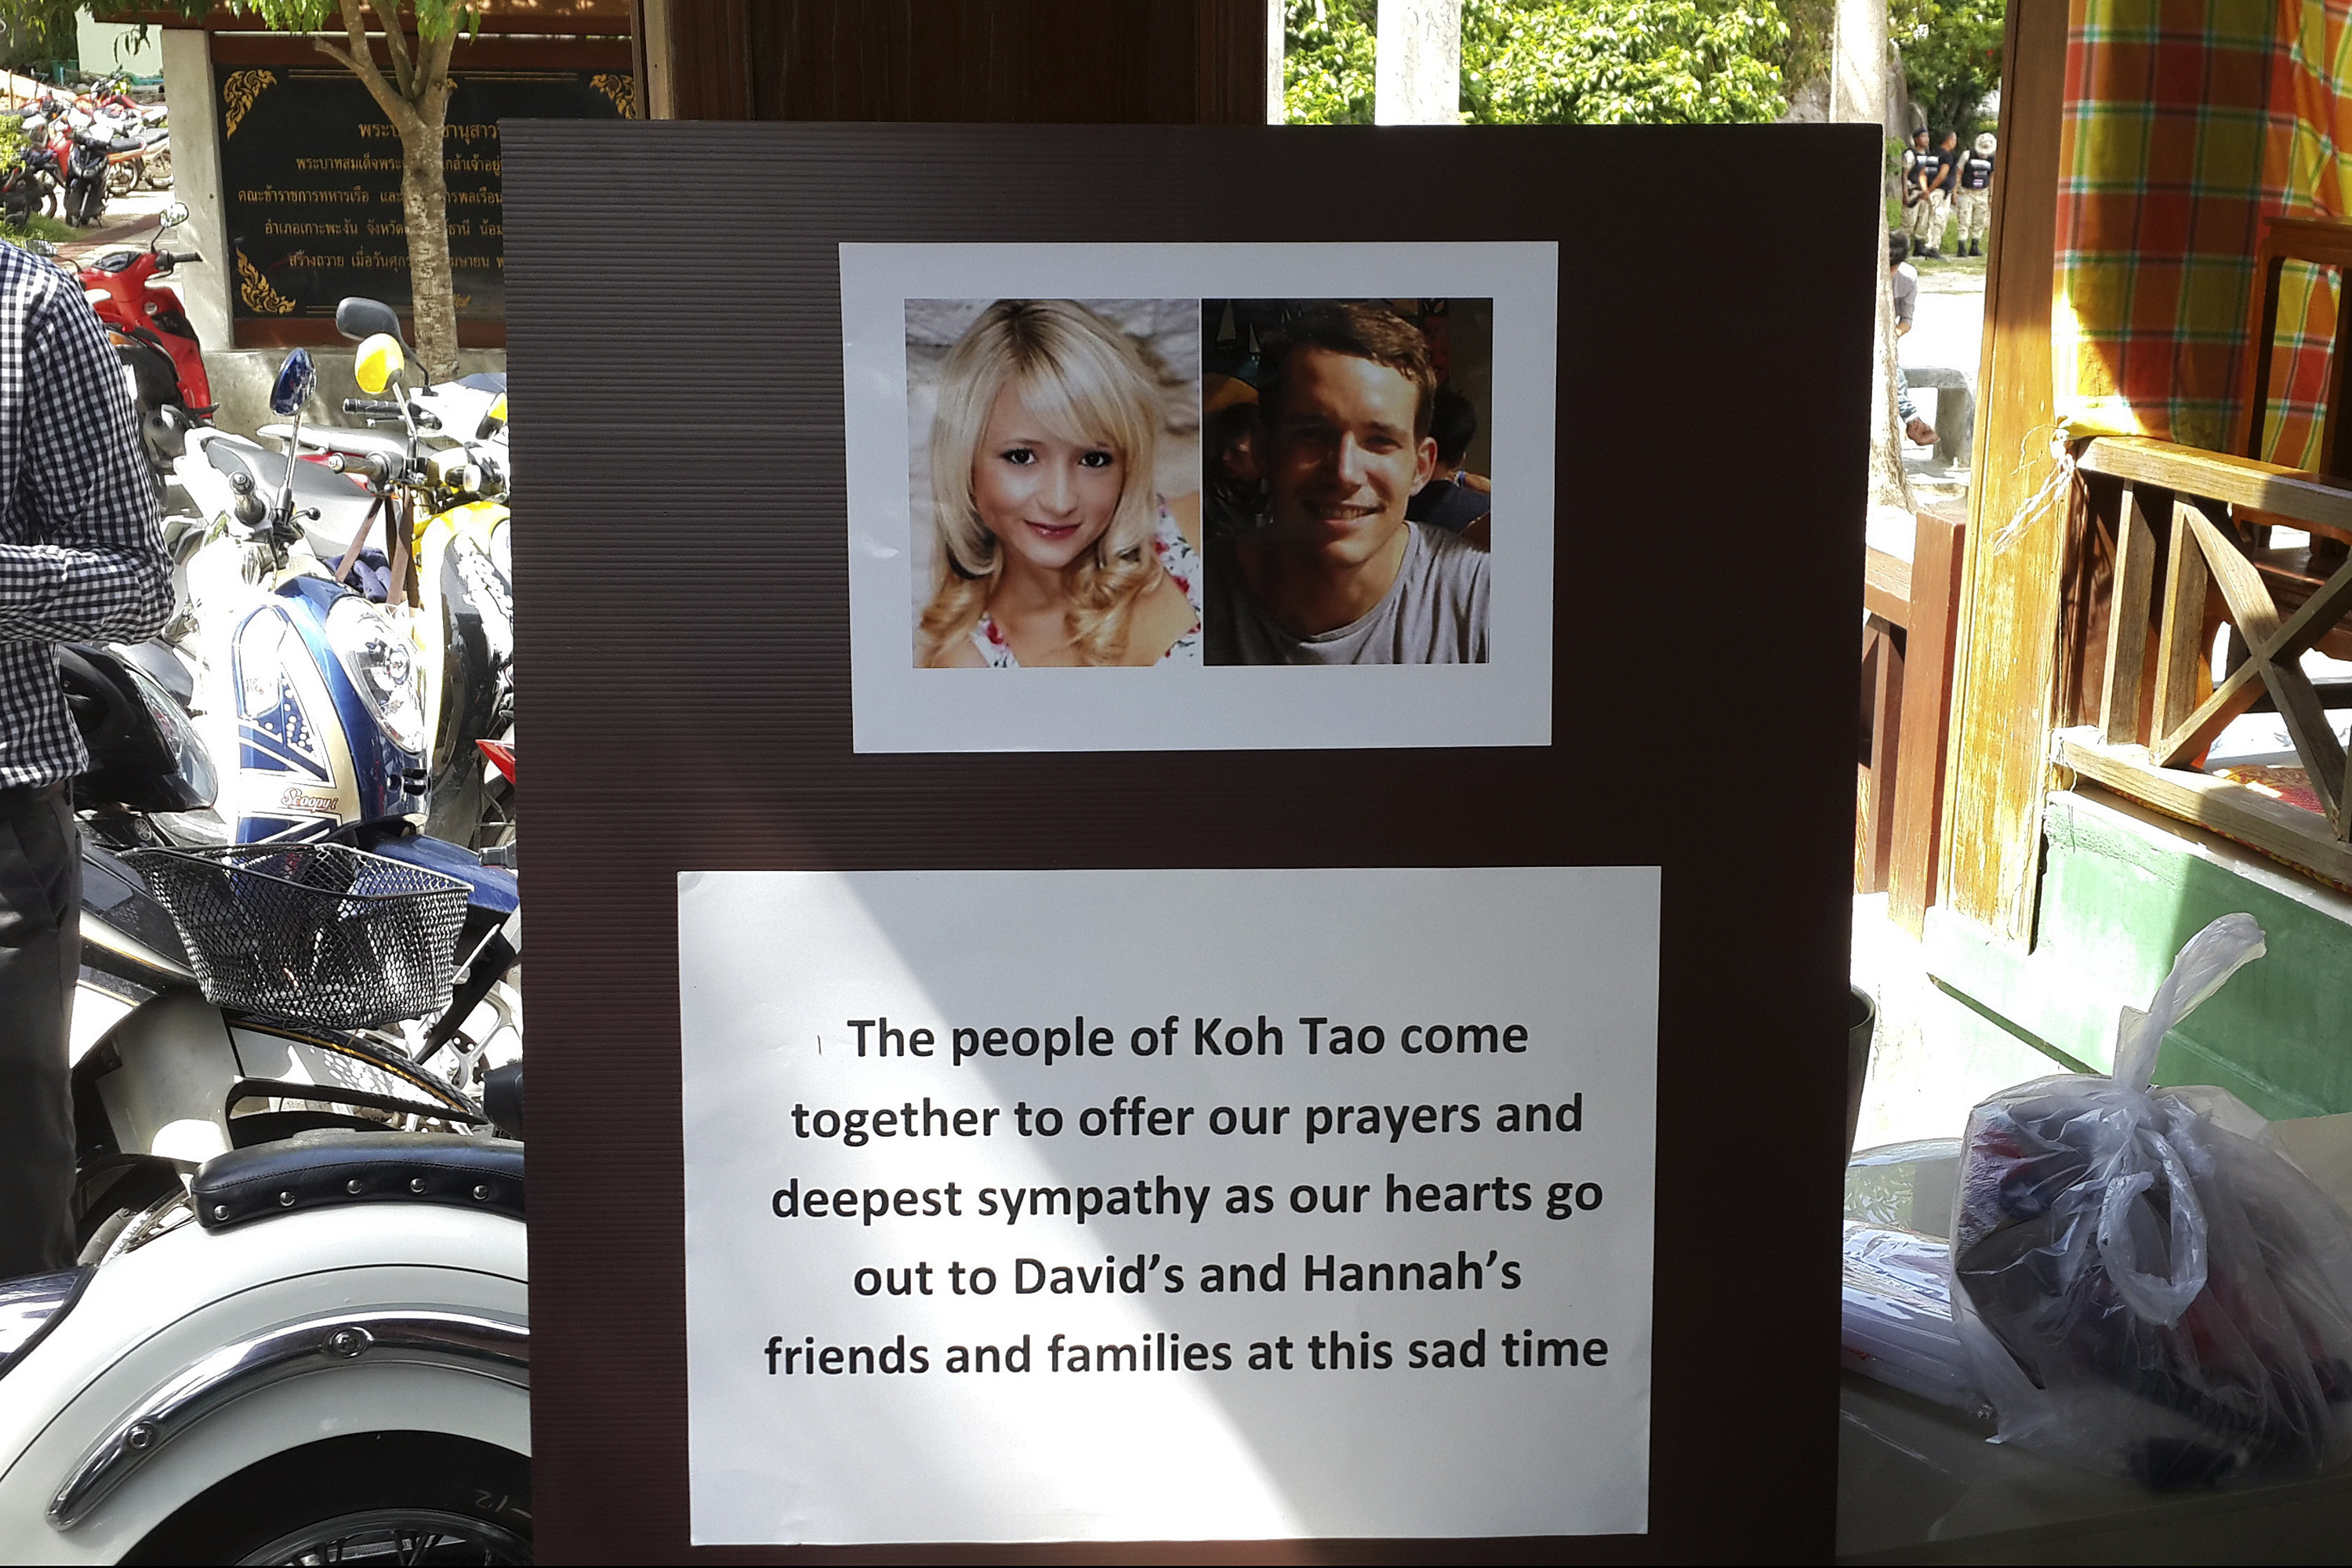 Pictures of killed British tourists David Miller and Hannah Witheridge and a message of support to their friends and families are displayed during special prayers at Koh Tao island on Sept. 18, 2014 (Sitthipong Charoenjai—Reuters)